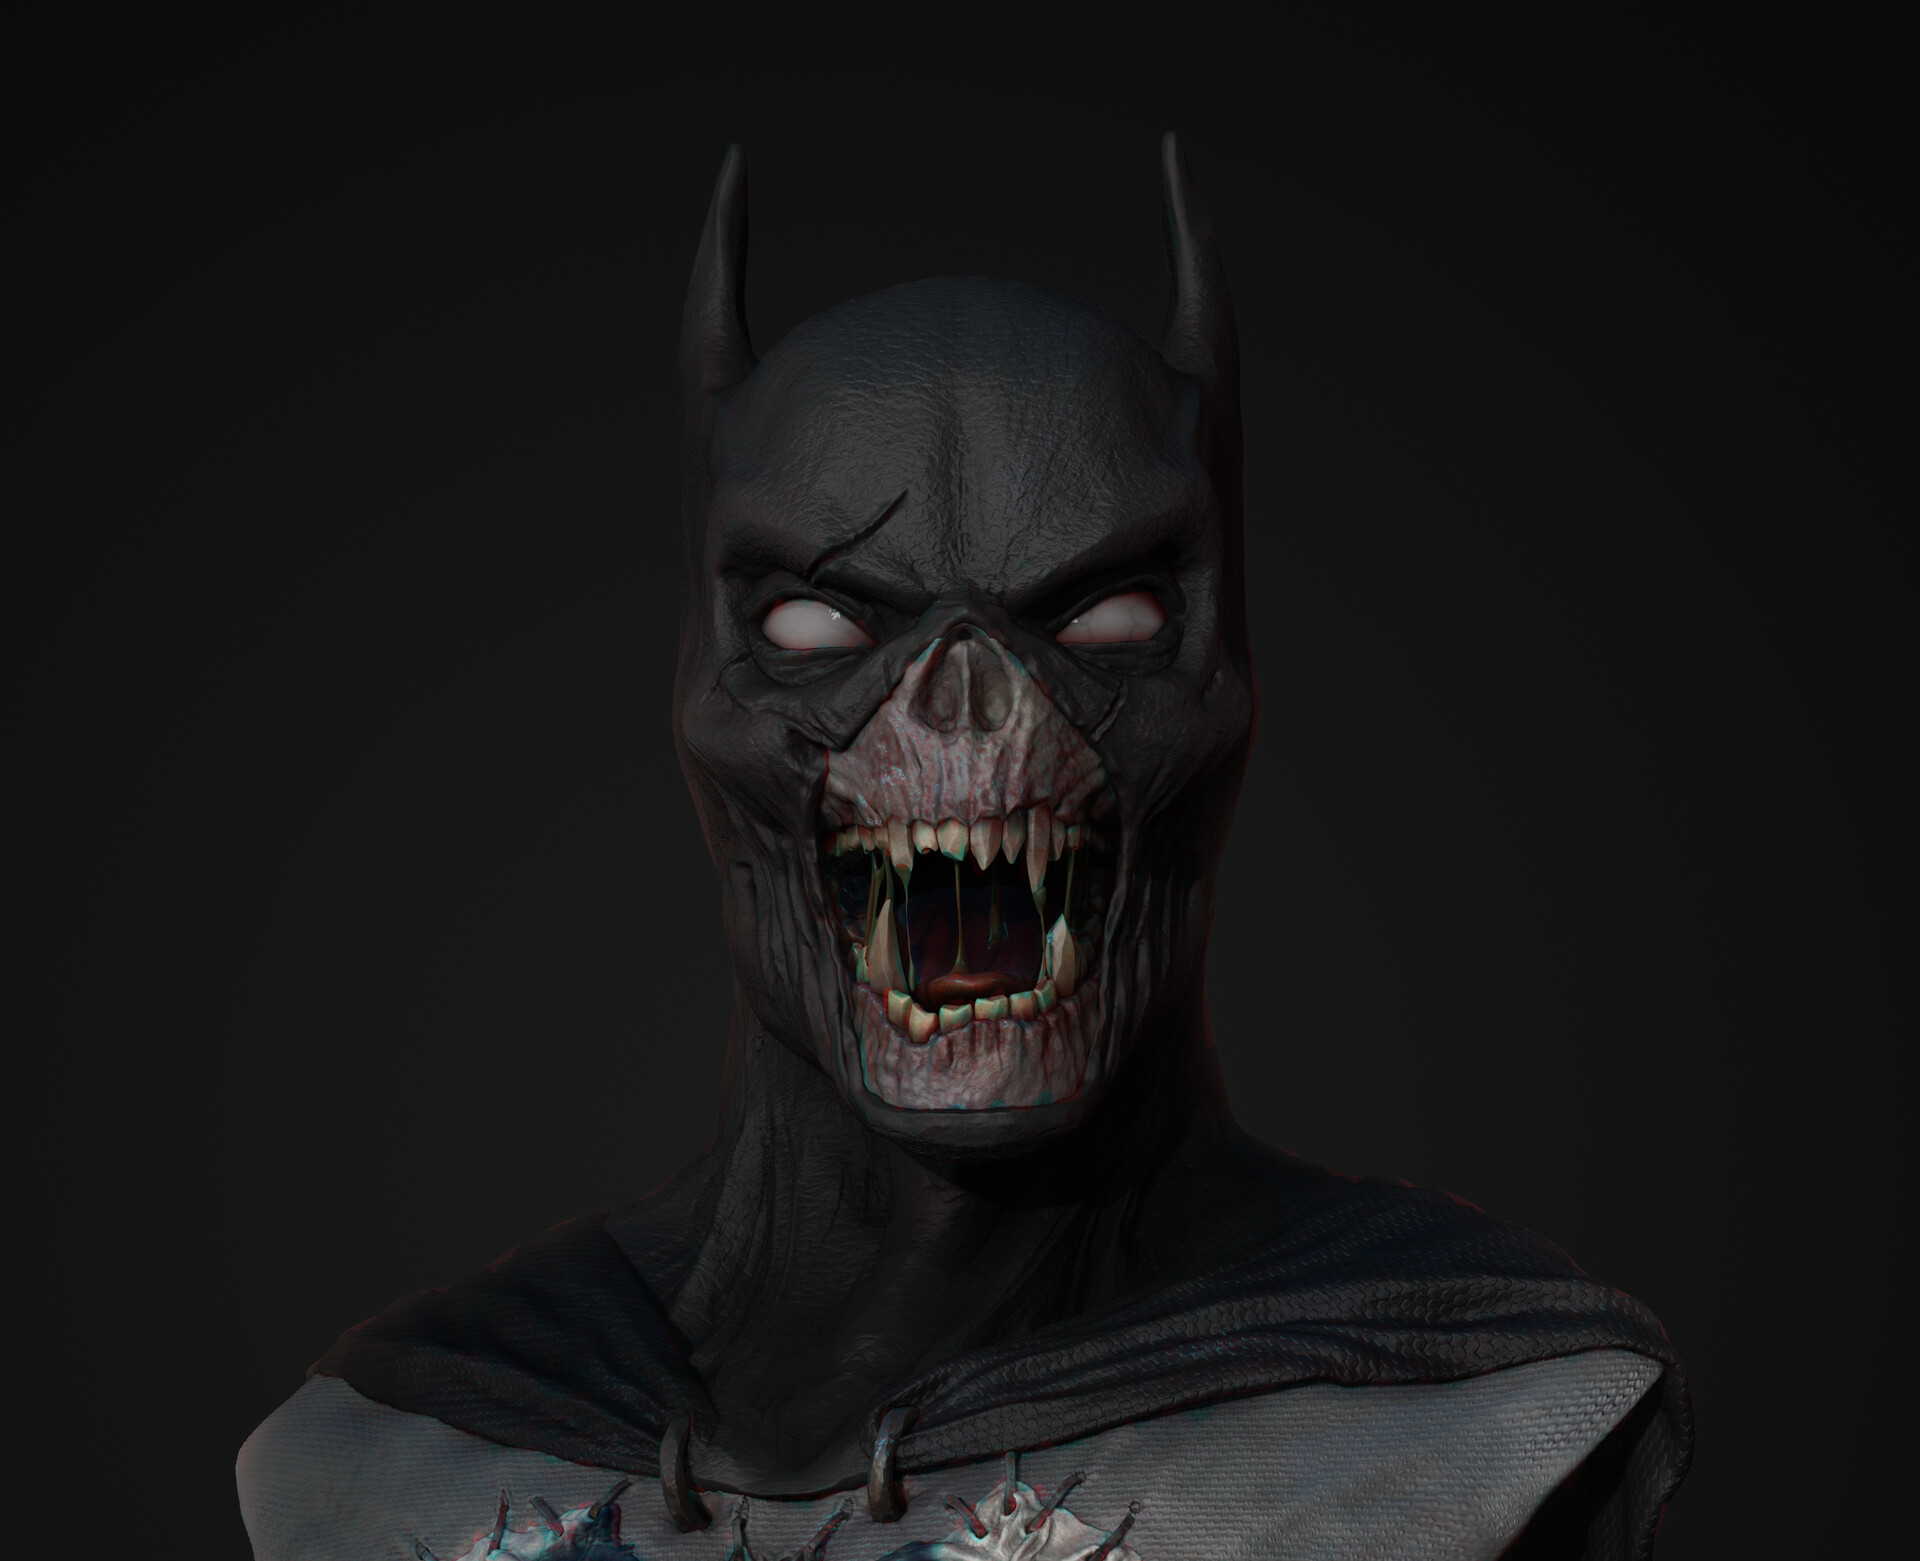 Batman is turning to zombie, face to camera, frighte